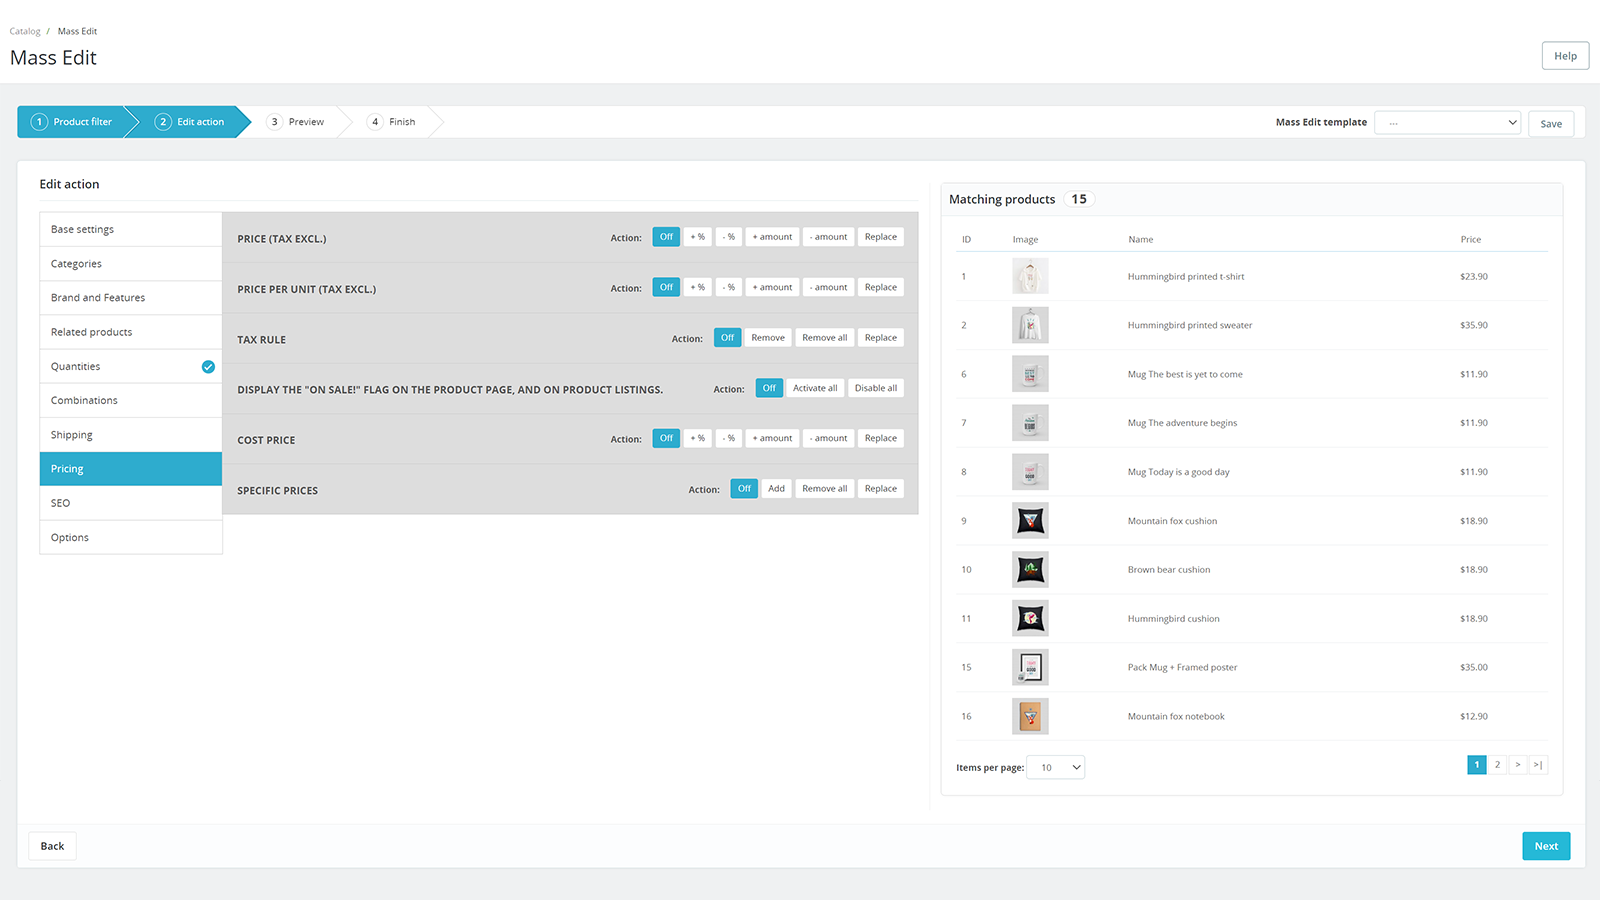 A screenshot of Product Manager module, display the mass edit feature